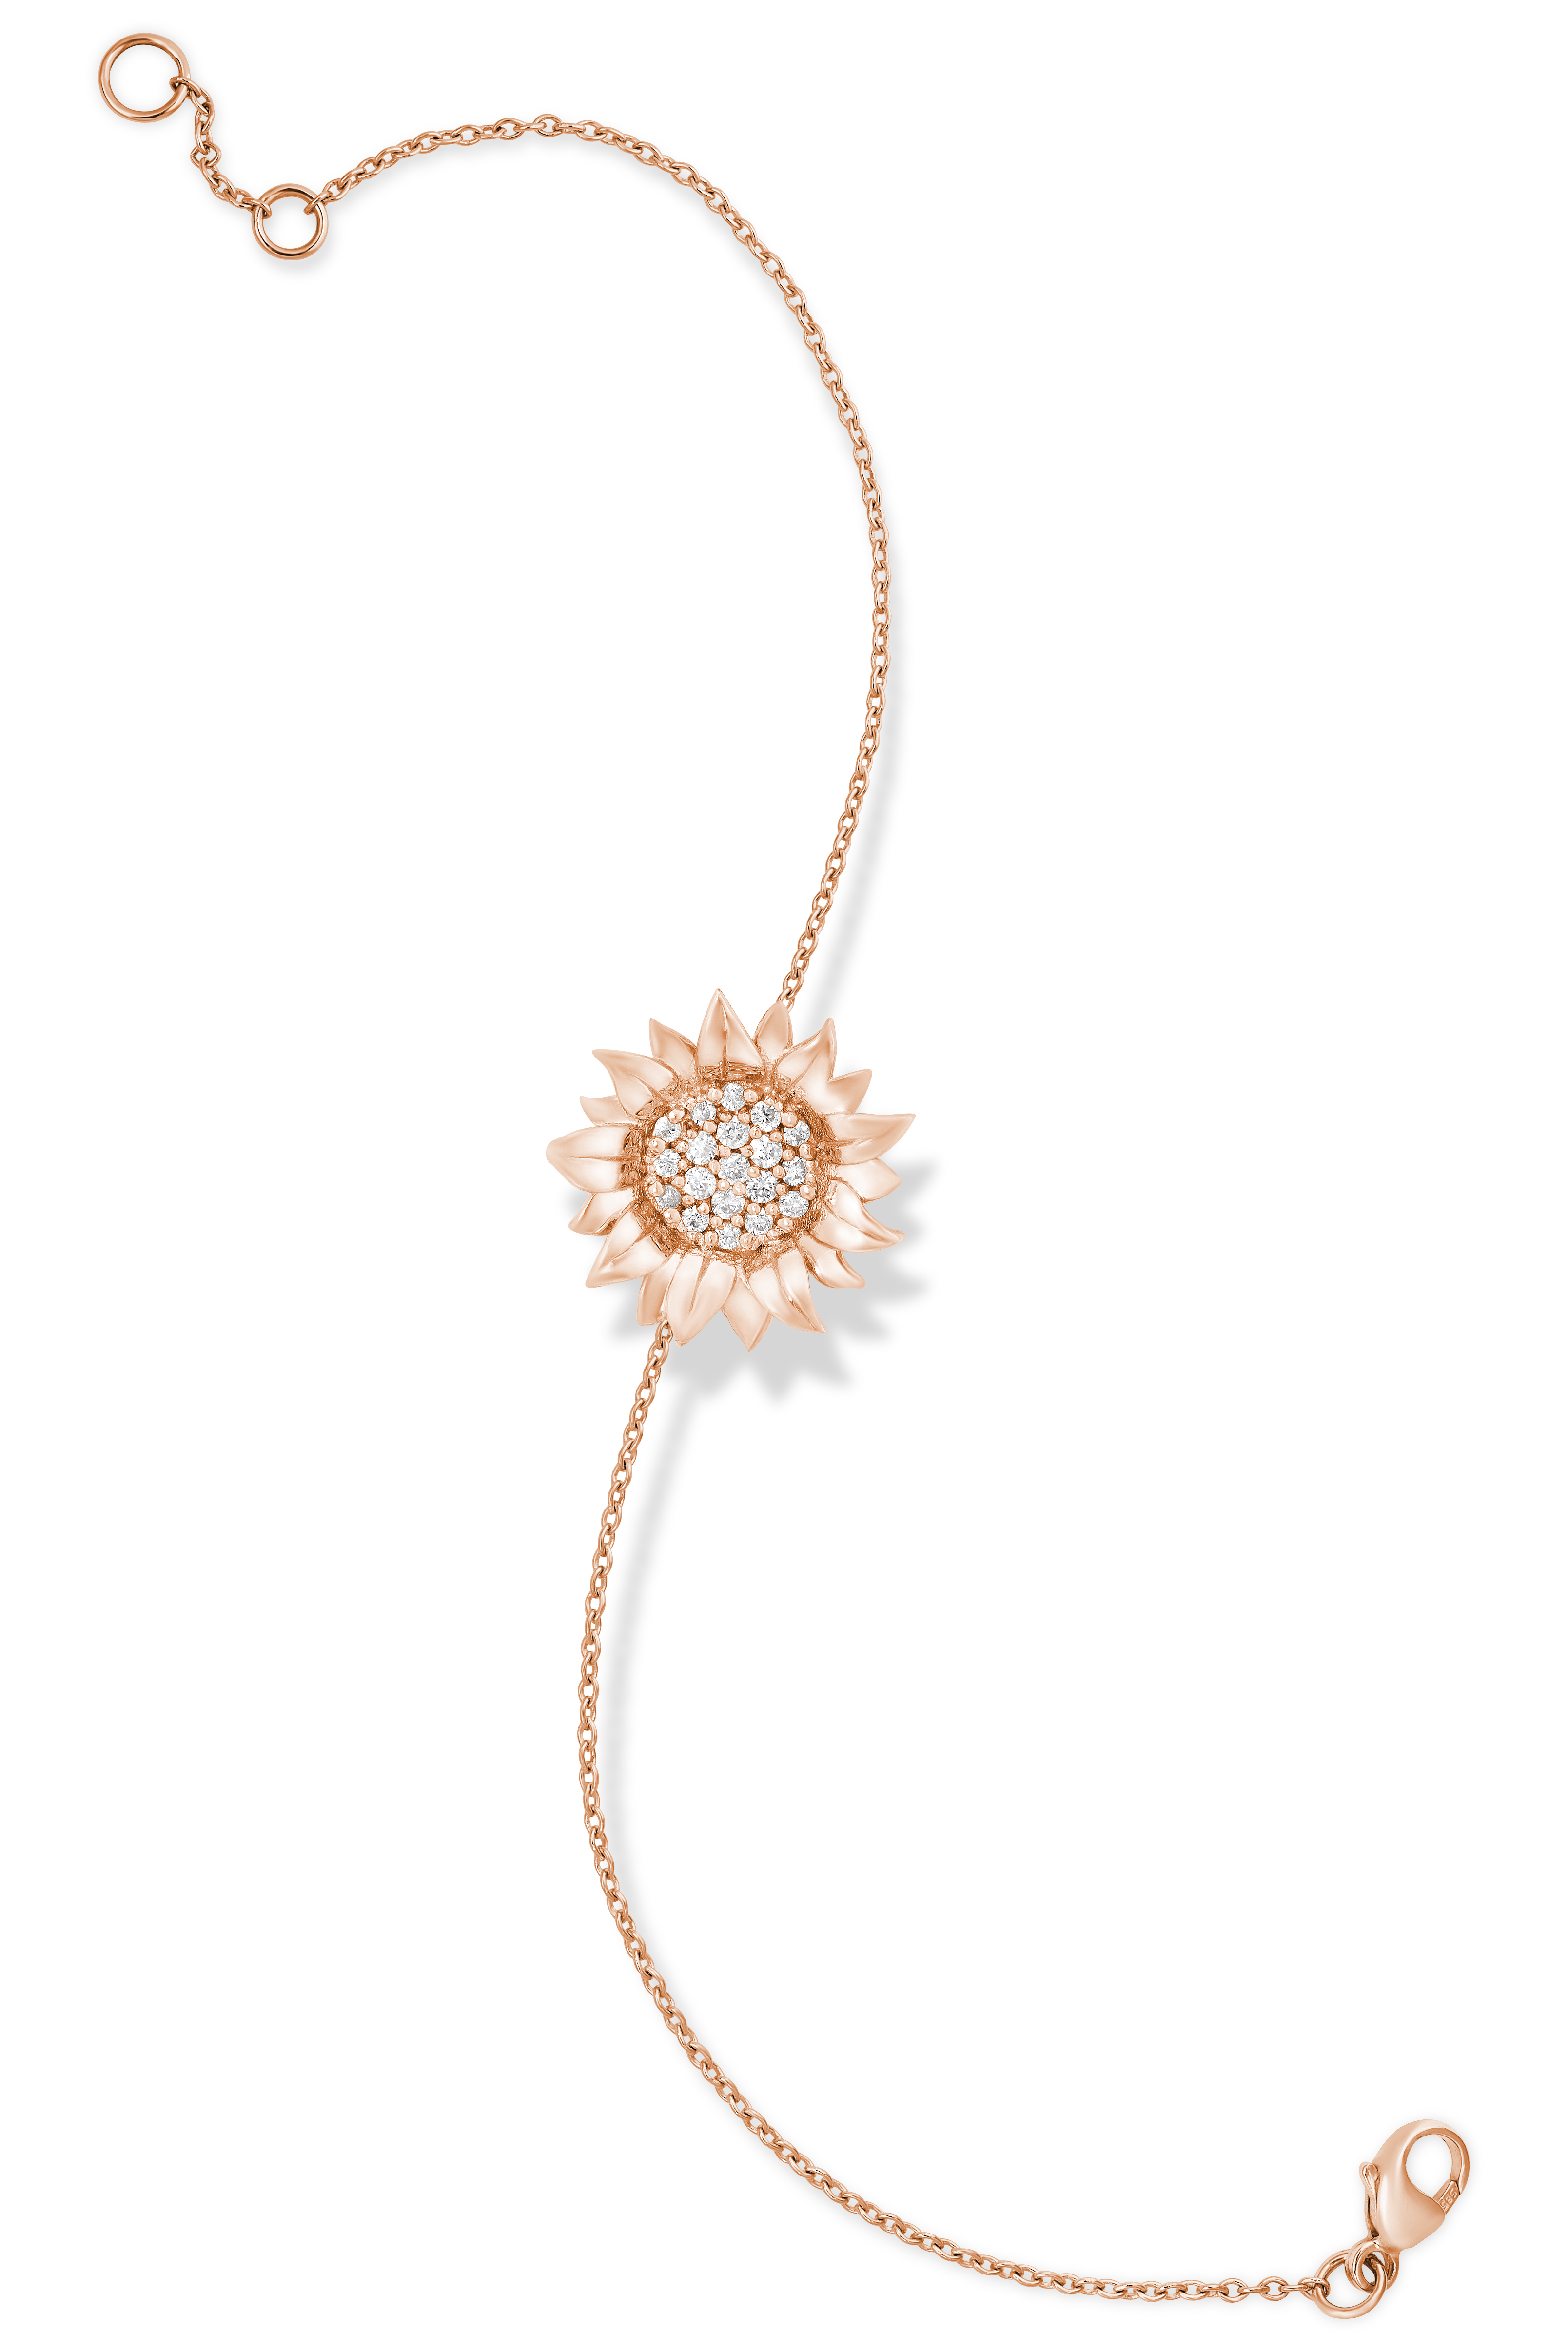 Blooming Hope: The Inspiring Story of Zaltas Fine Jewelers’ Hope Sunflowers Collection